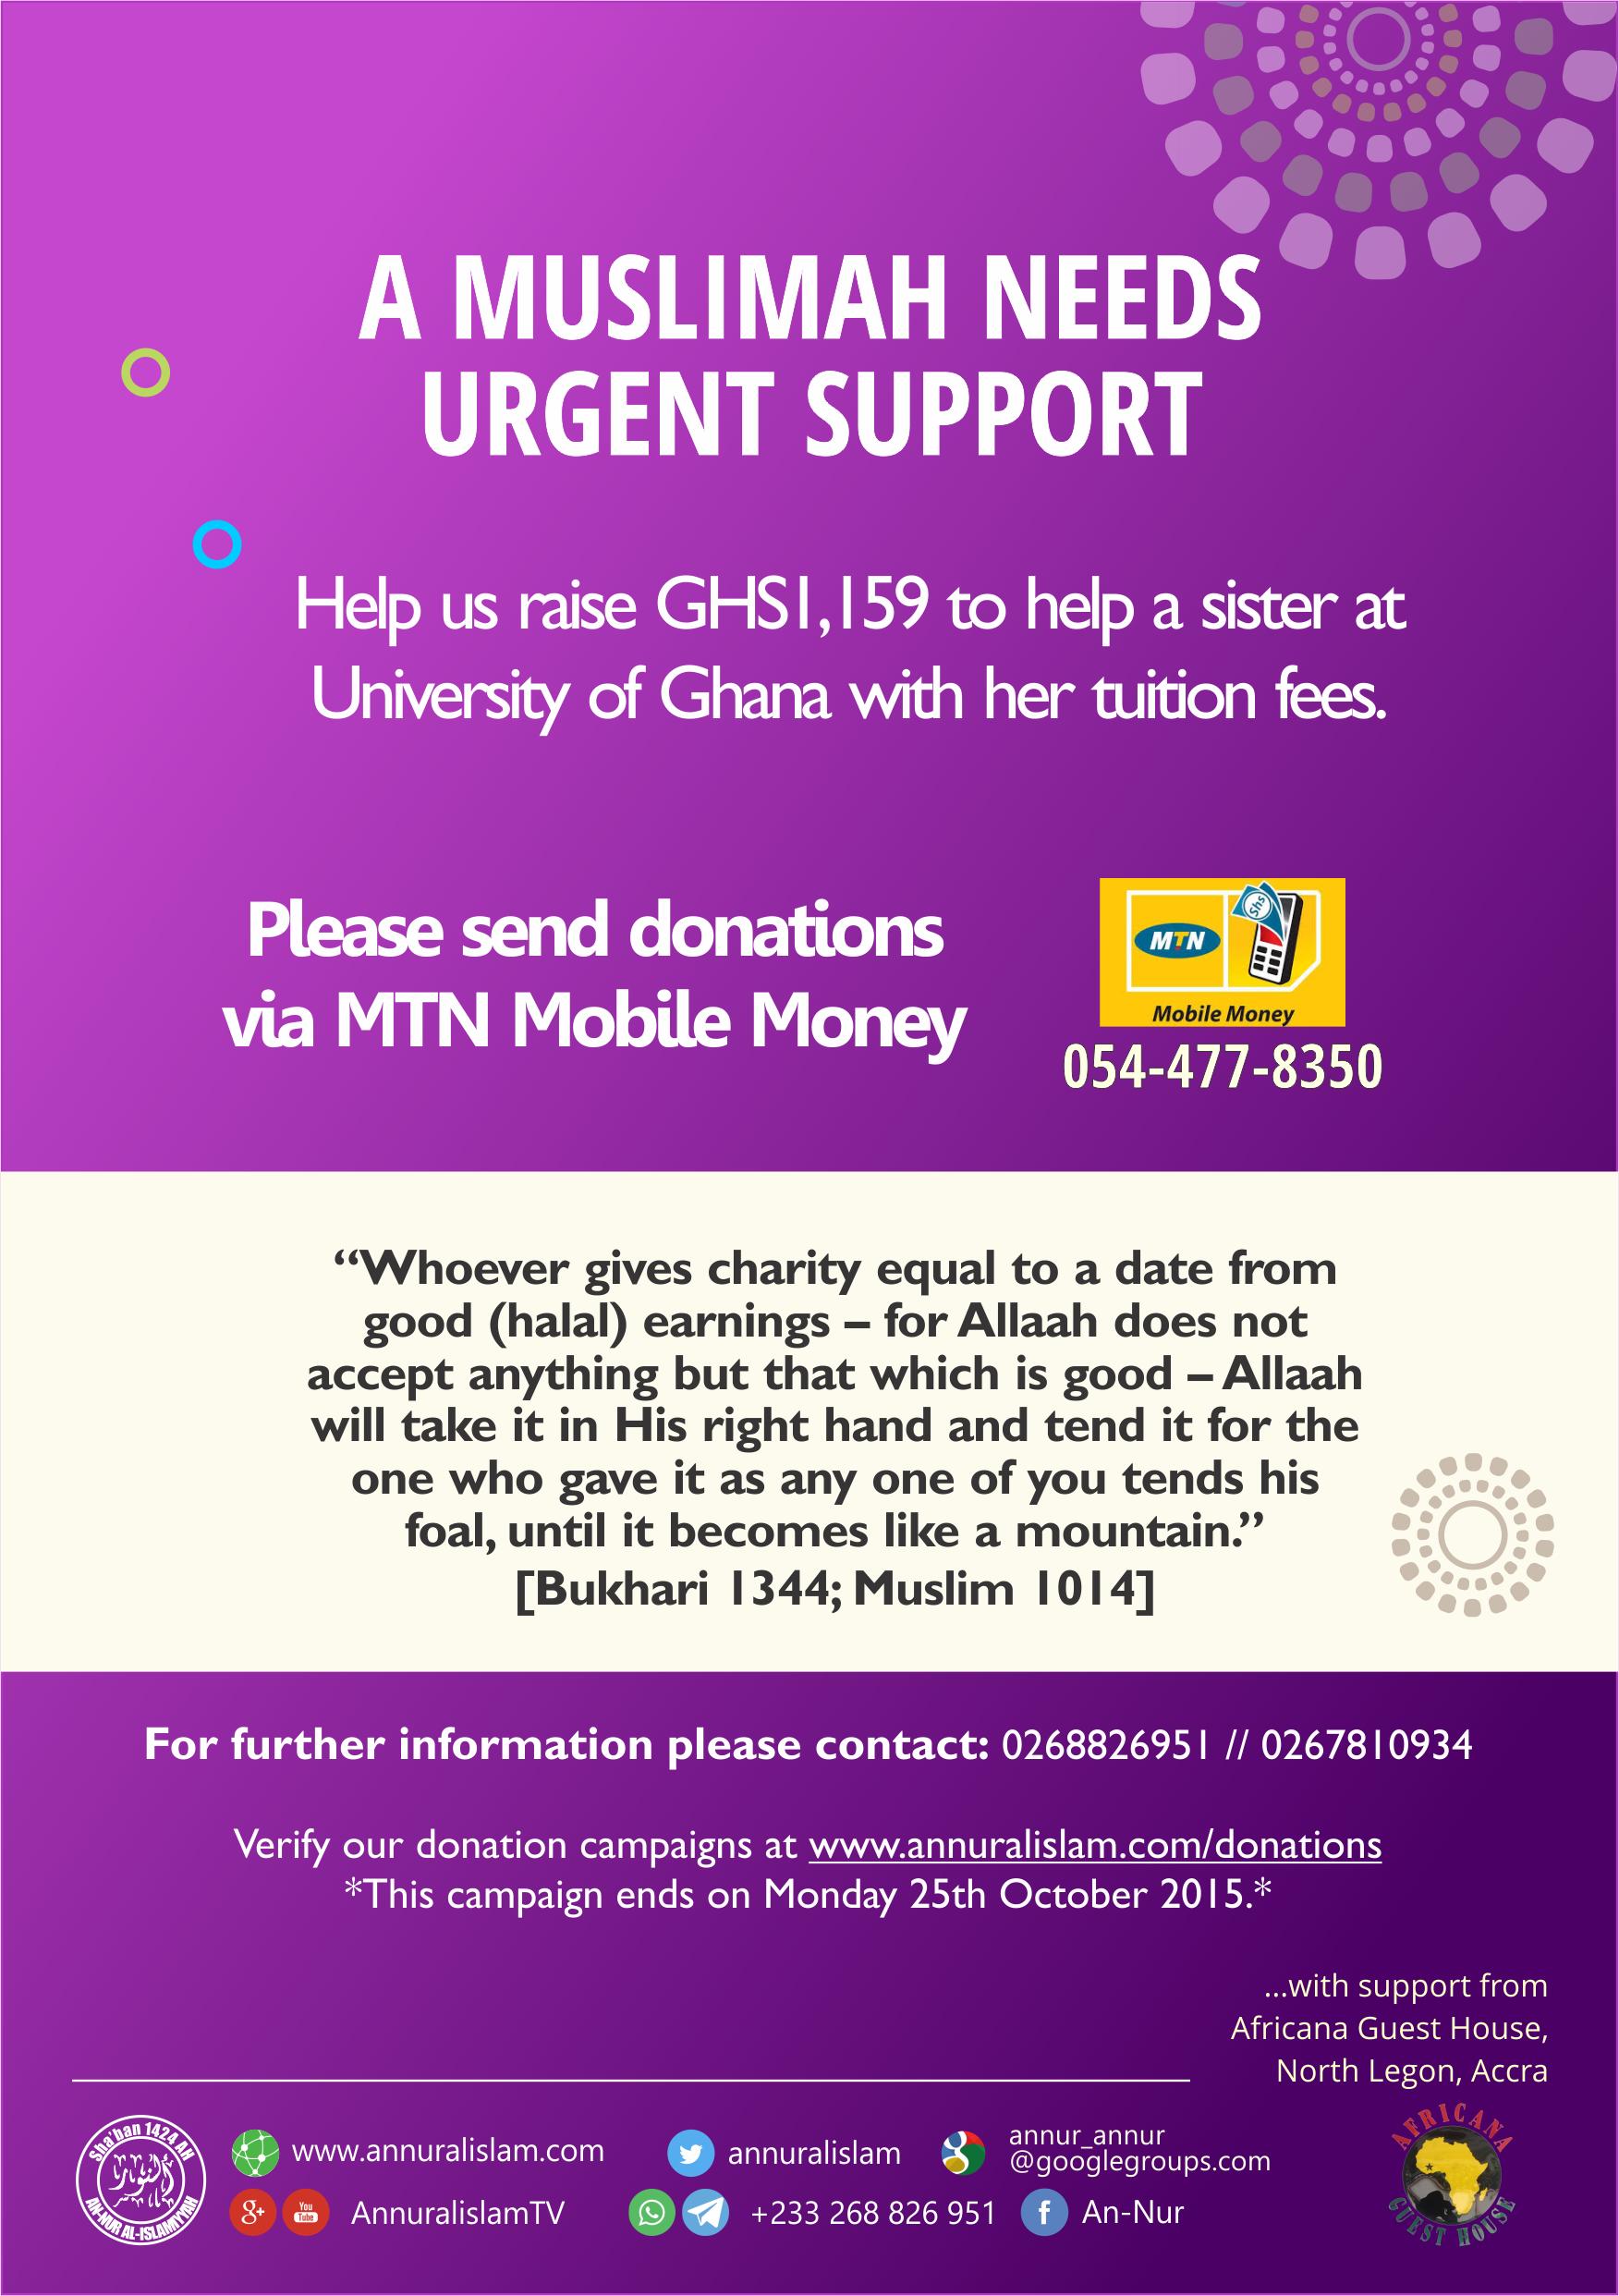 Another Muslimah in need of support